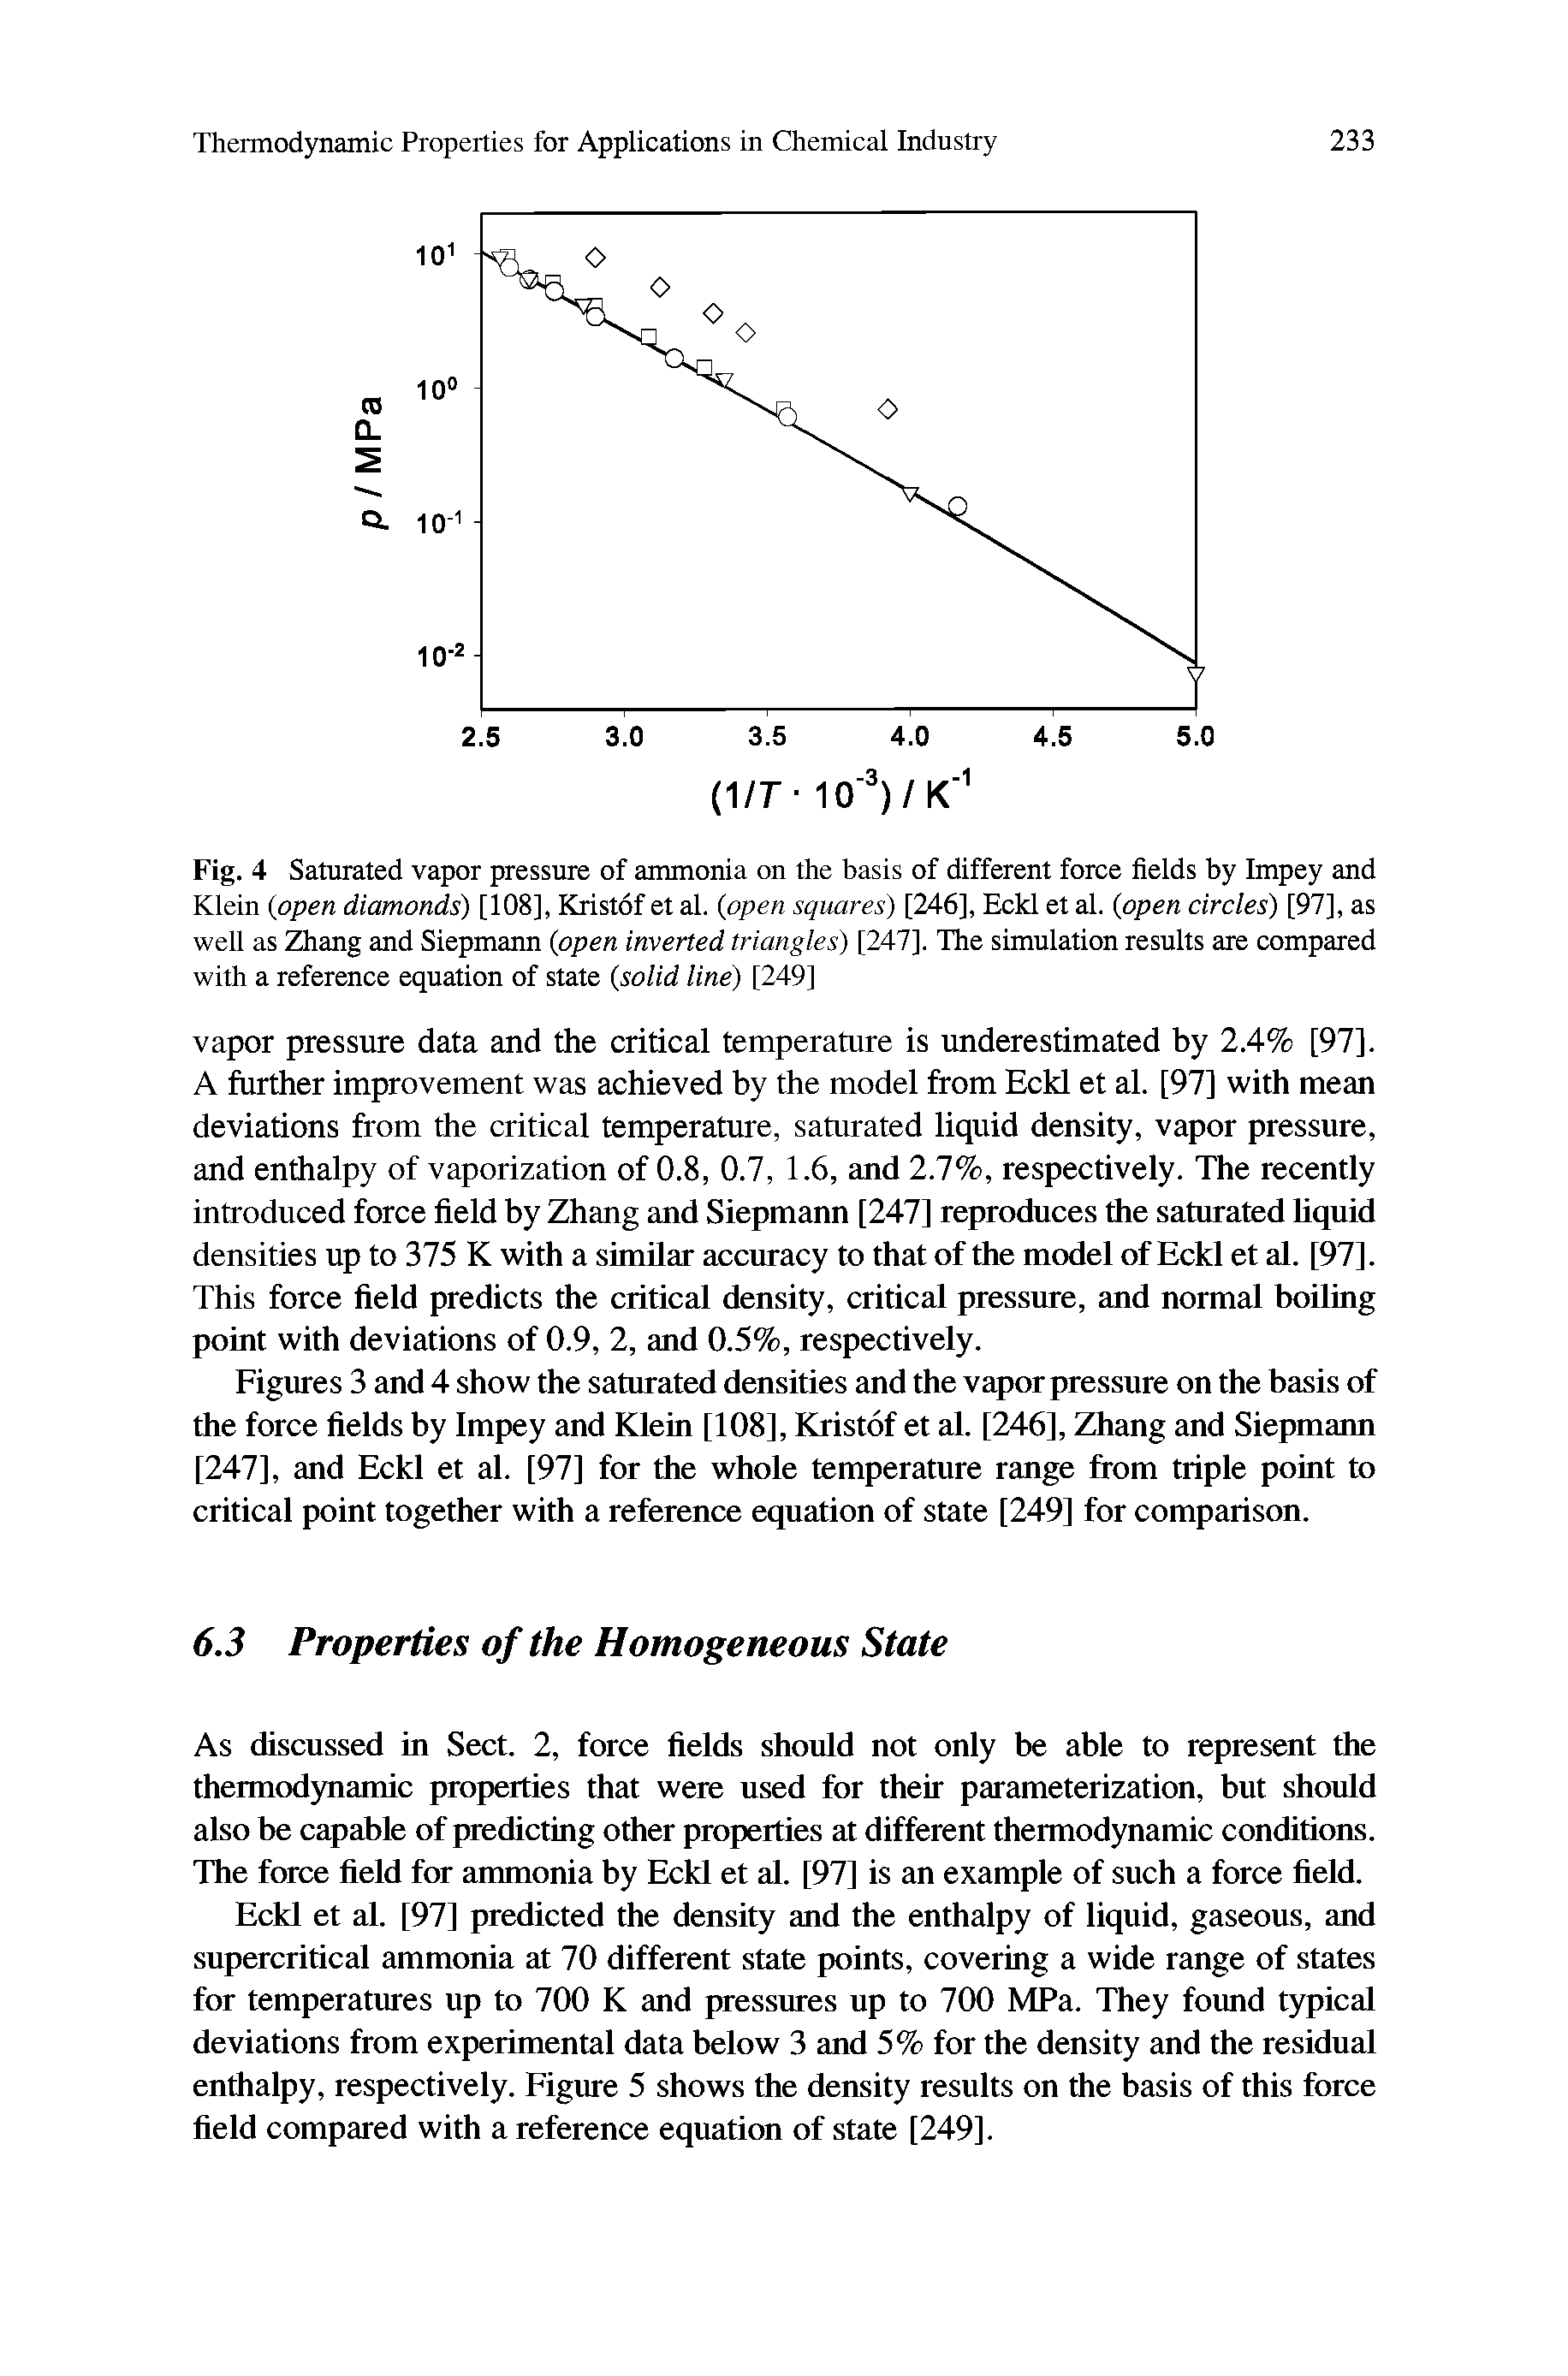 Fig. 4 Saturated vapor pressure of ammonia on the basis of different force fields by Impey and Klein (open diamonds) [108], Kristof et al. (open squares) [246], Eckl et al. (open circles) [97], as well as Zhang and Siepmann (open inverted triangles) [247]. The simulation results are compared with a reference equation of state (solid line) [249]...